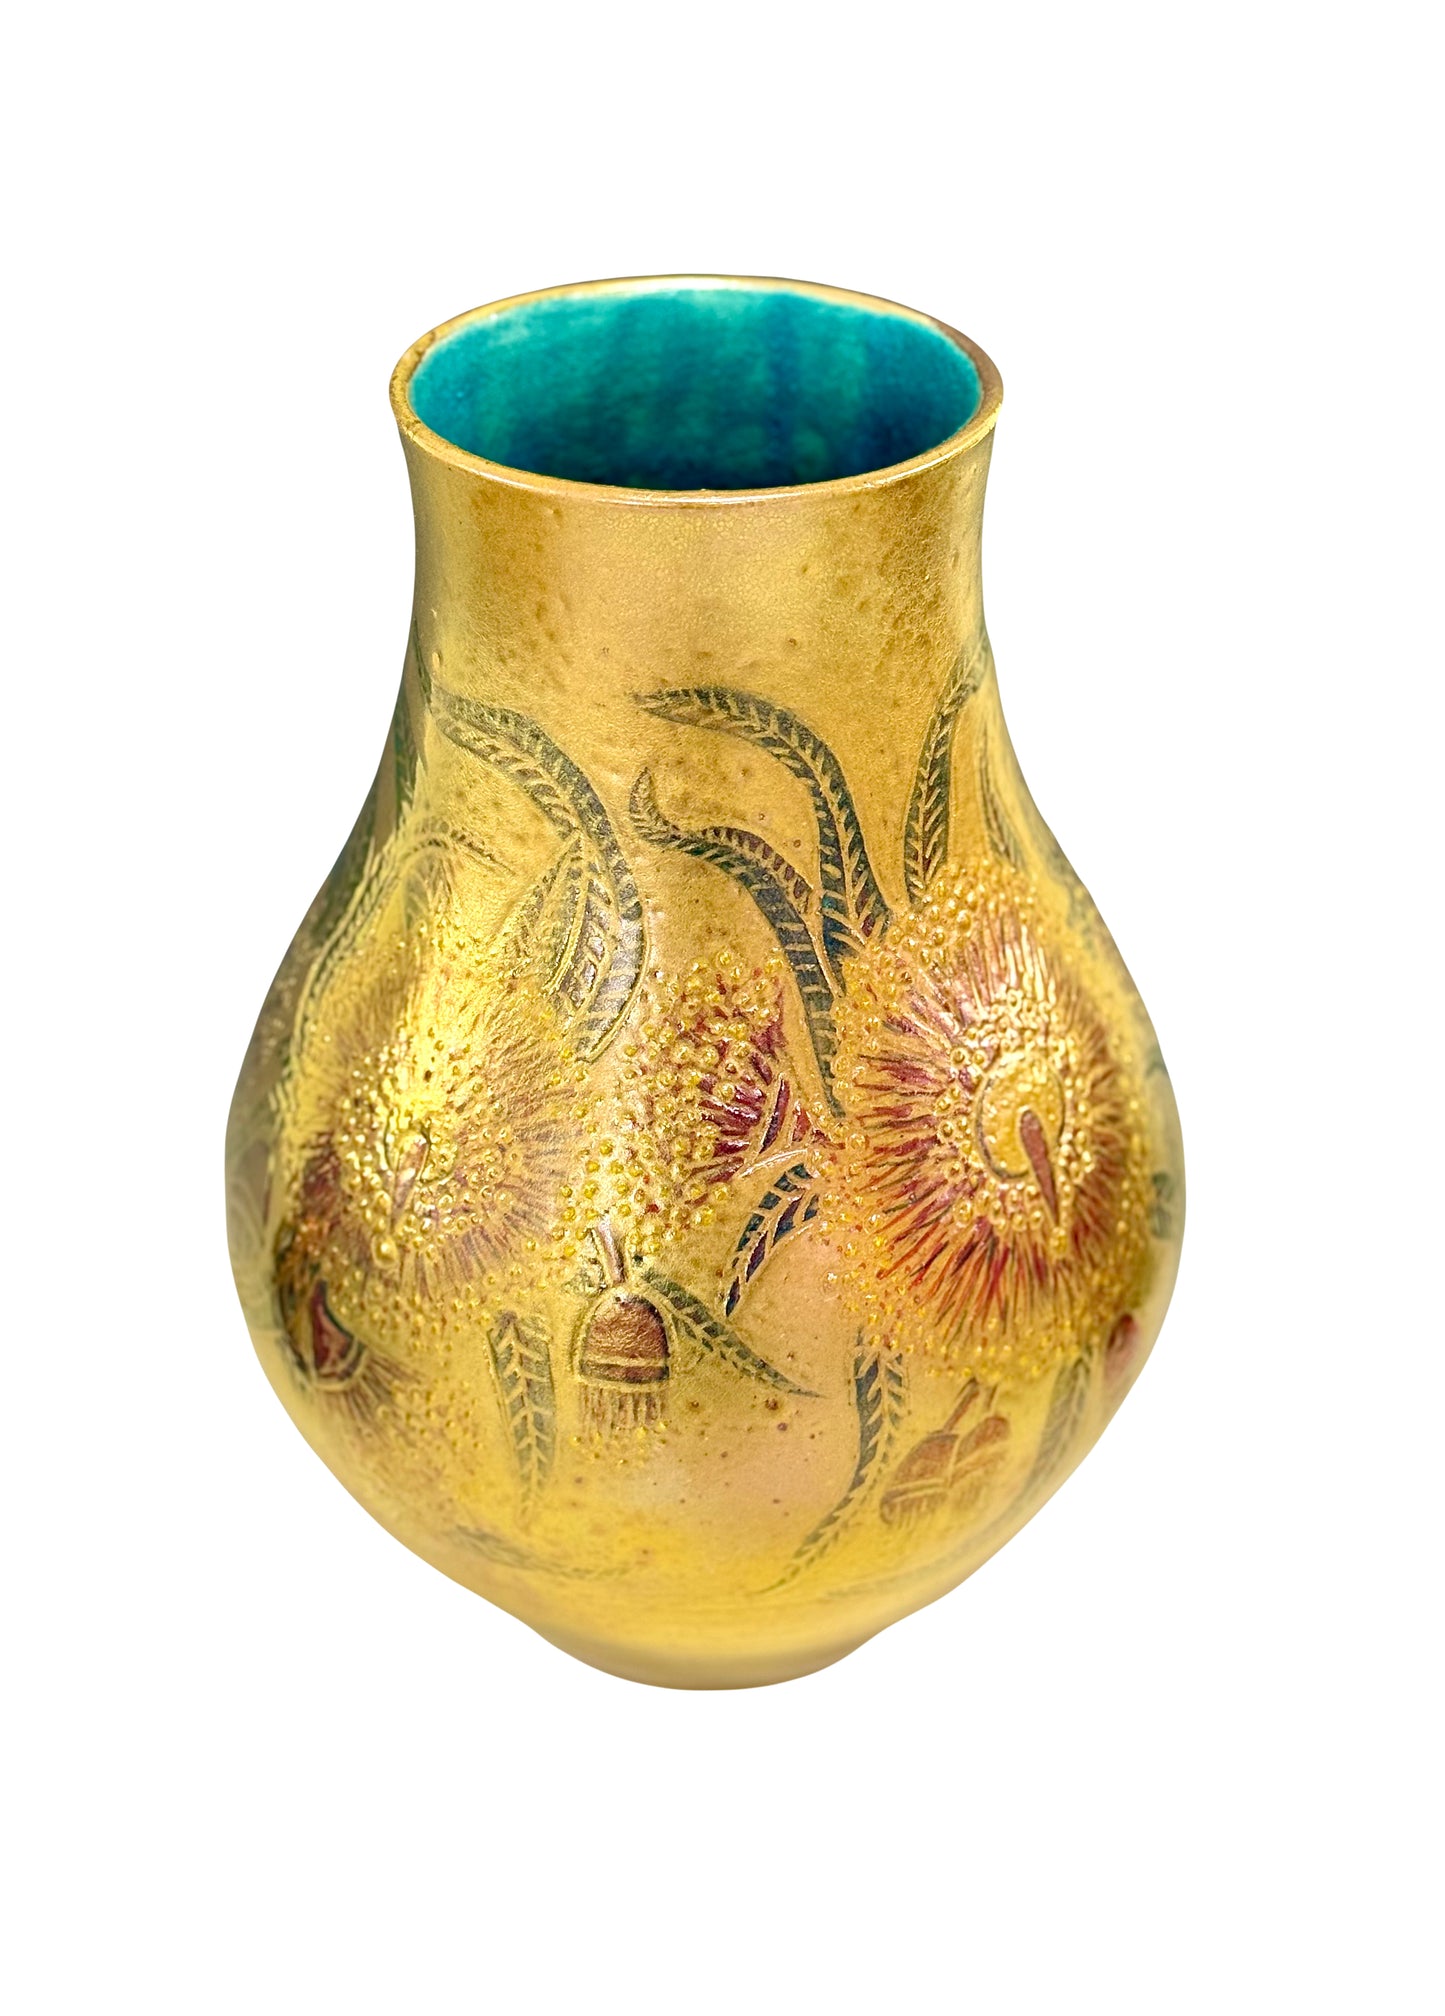 Gold Luster Glaze Vase with Eucalyptus Blossoms